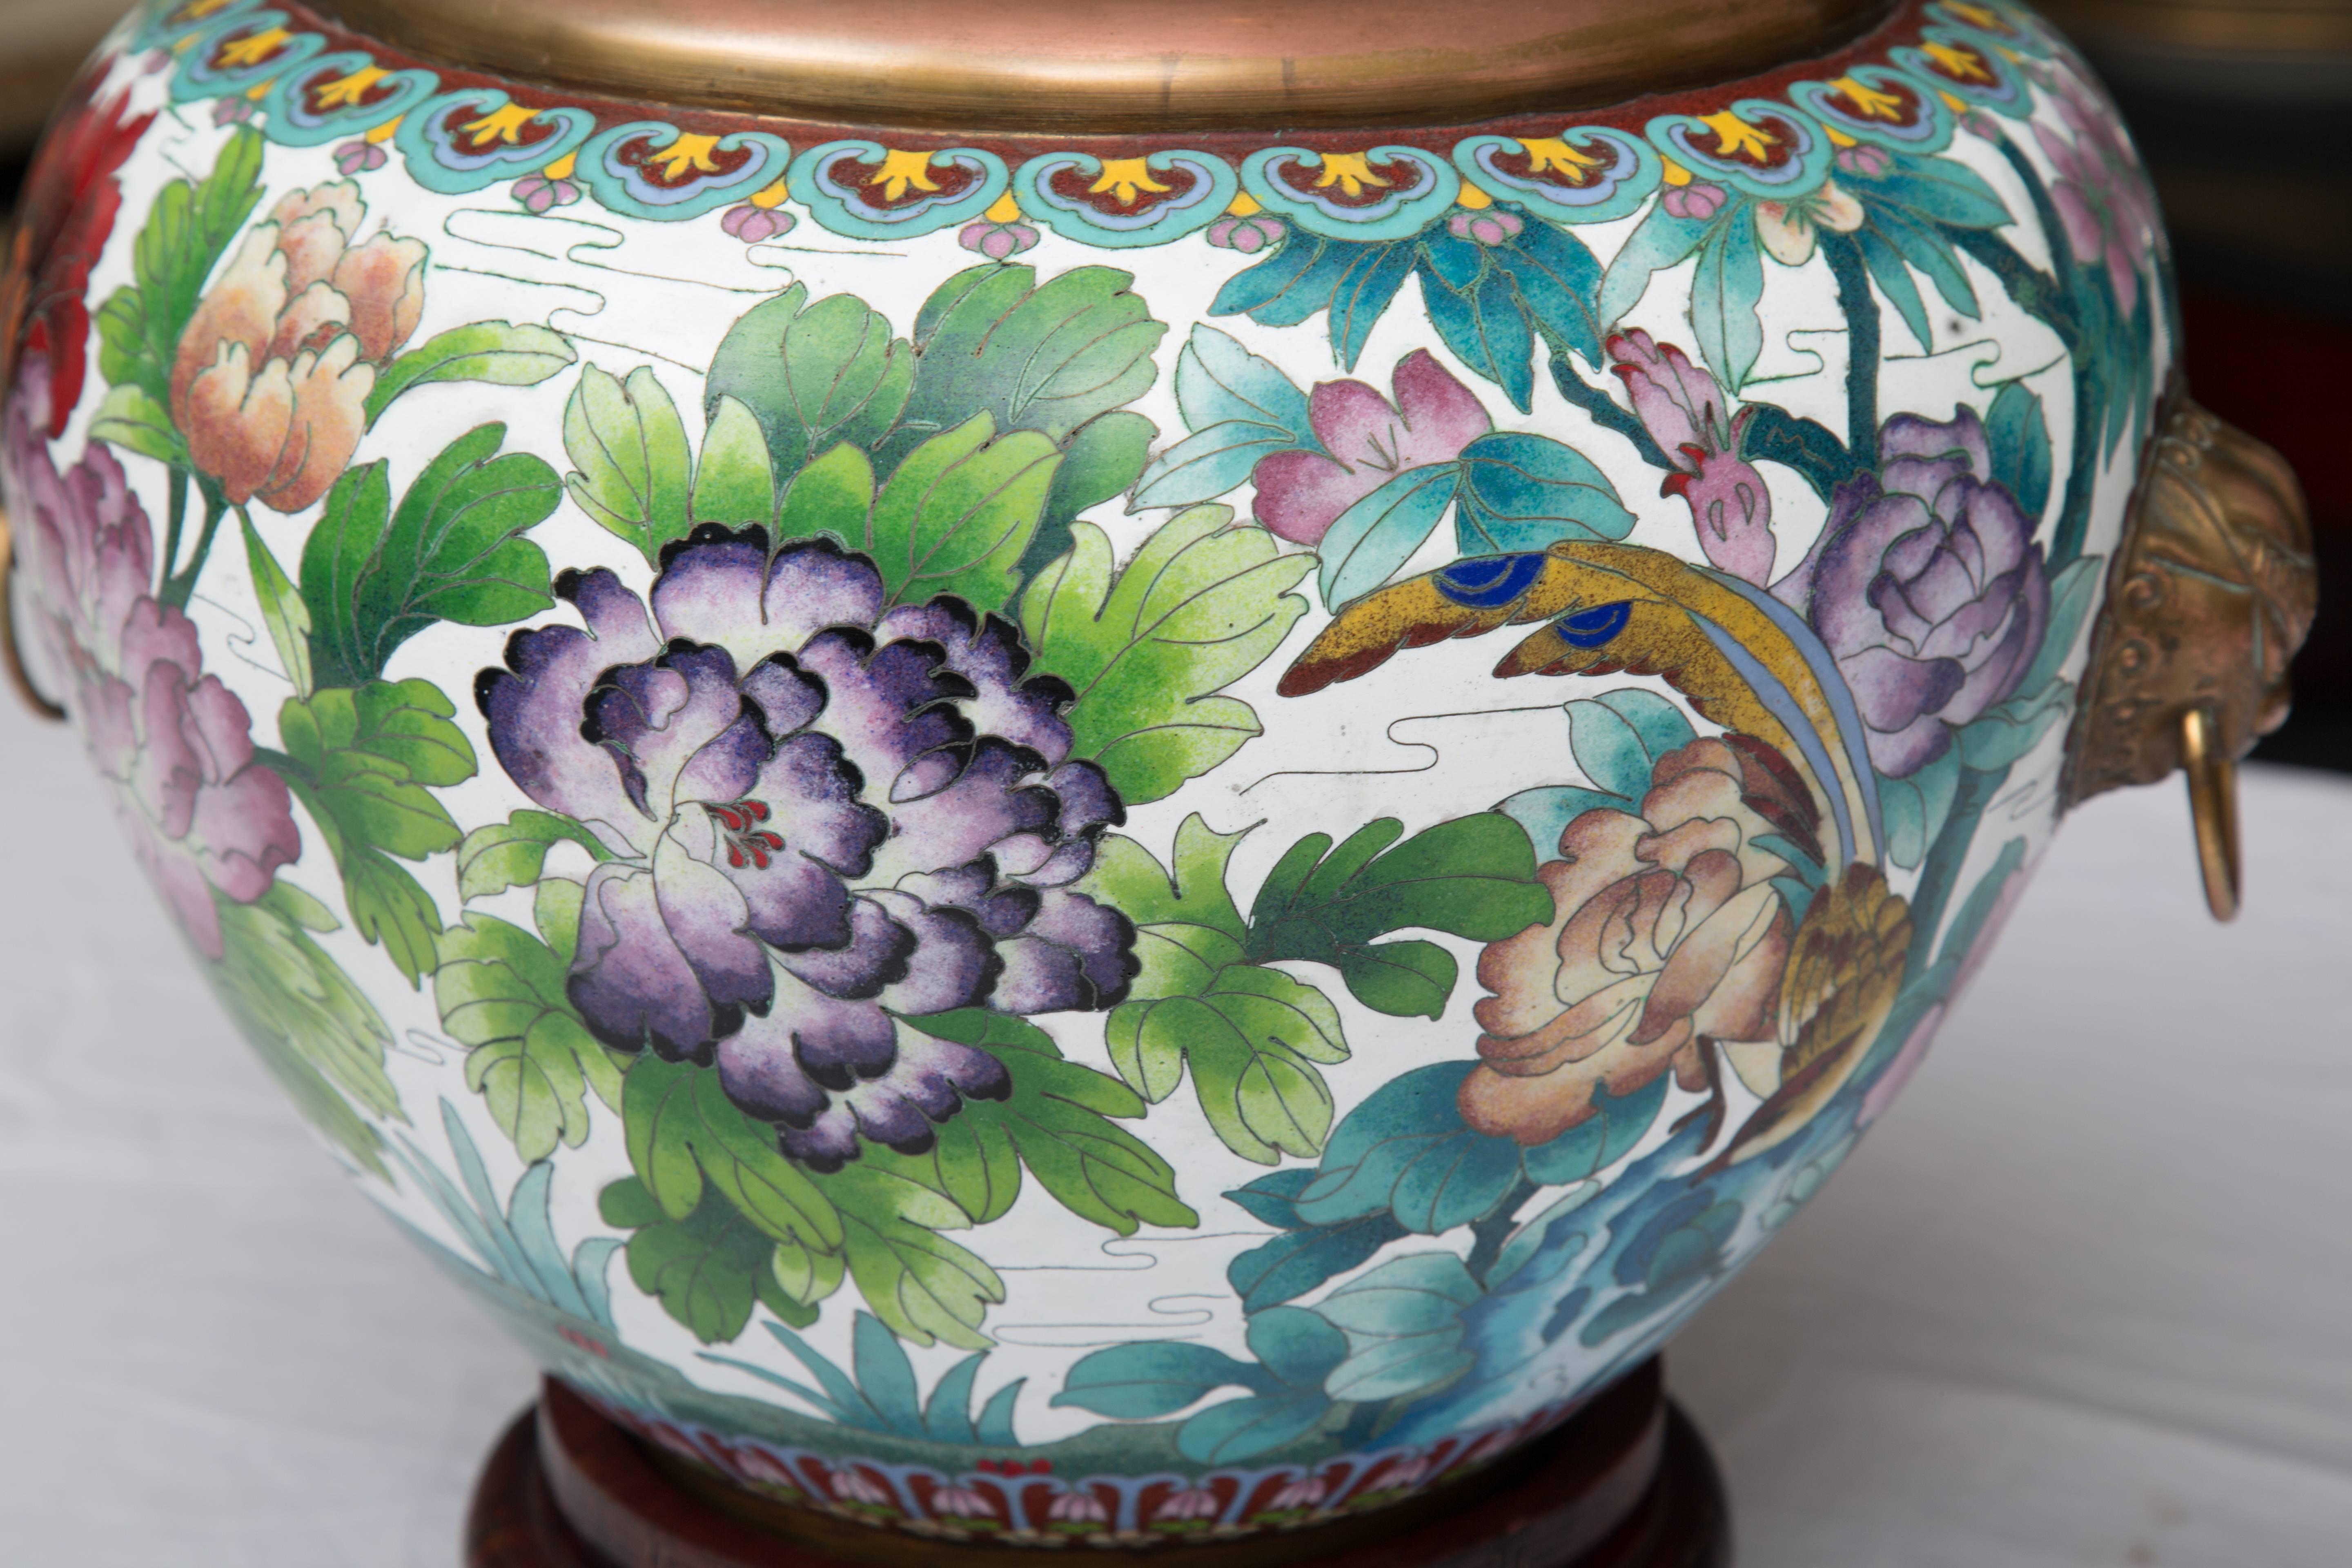 This is a colorful Chinese cloisonné jardiniere depicting birds, flowers and foliage with a prominent top rim and handles, circa 1930. 